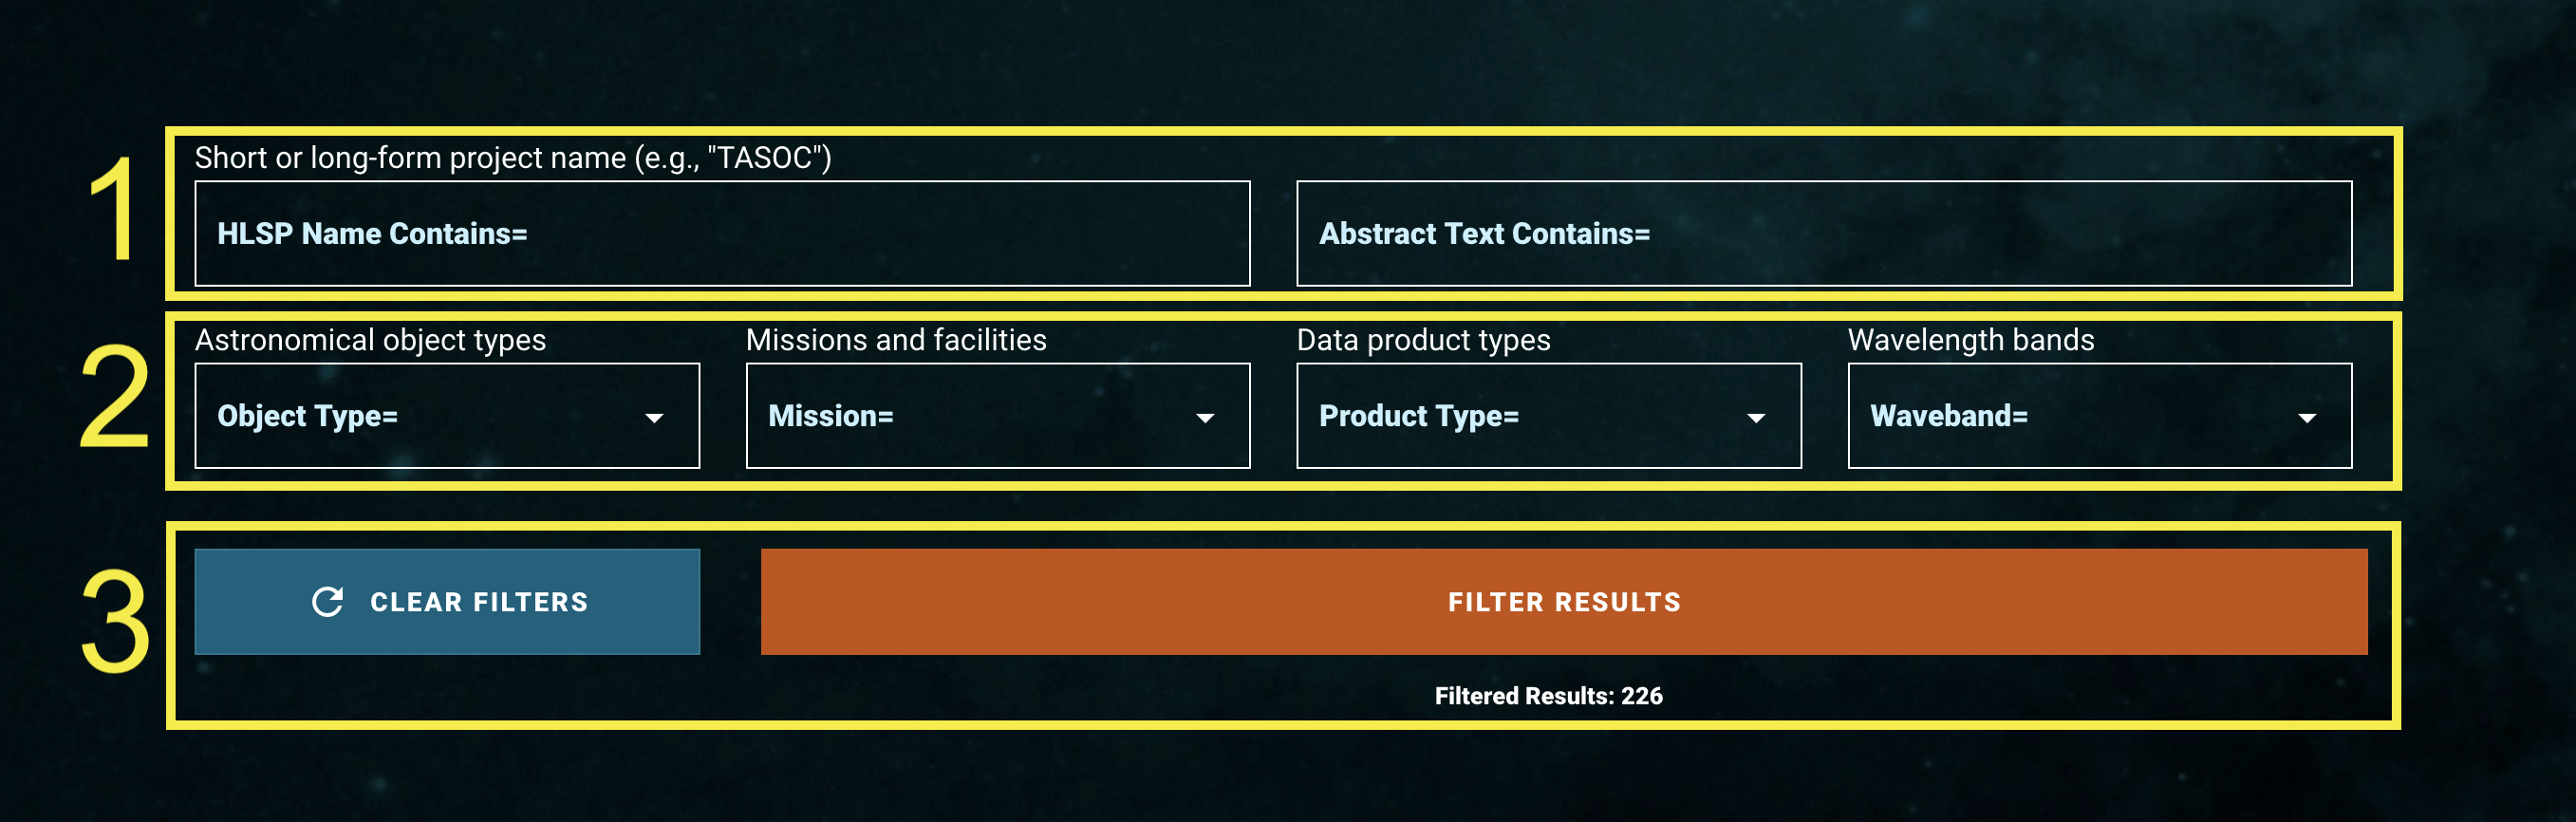 Screenshot of the search form. The top row of components (HLSP name and abstracts) is labeled #1, the middle row of components (object type, mission, product type, waveband) #2, and the search bar #3.